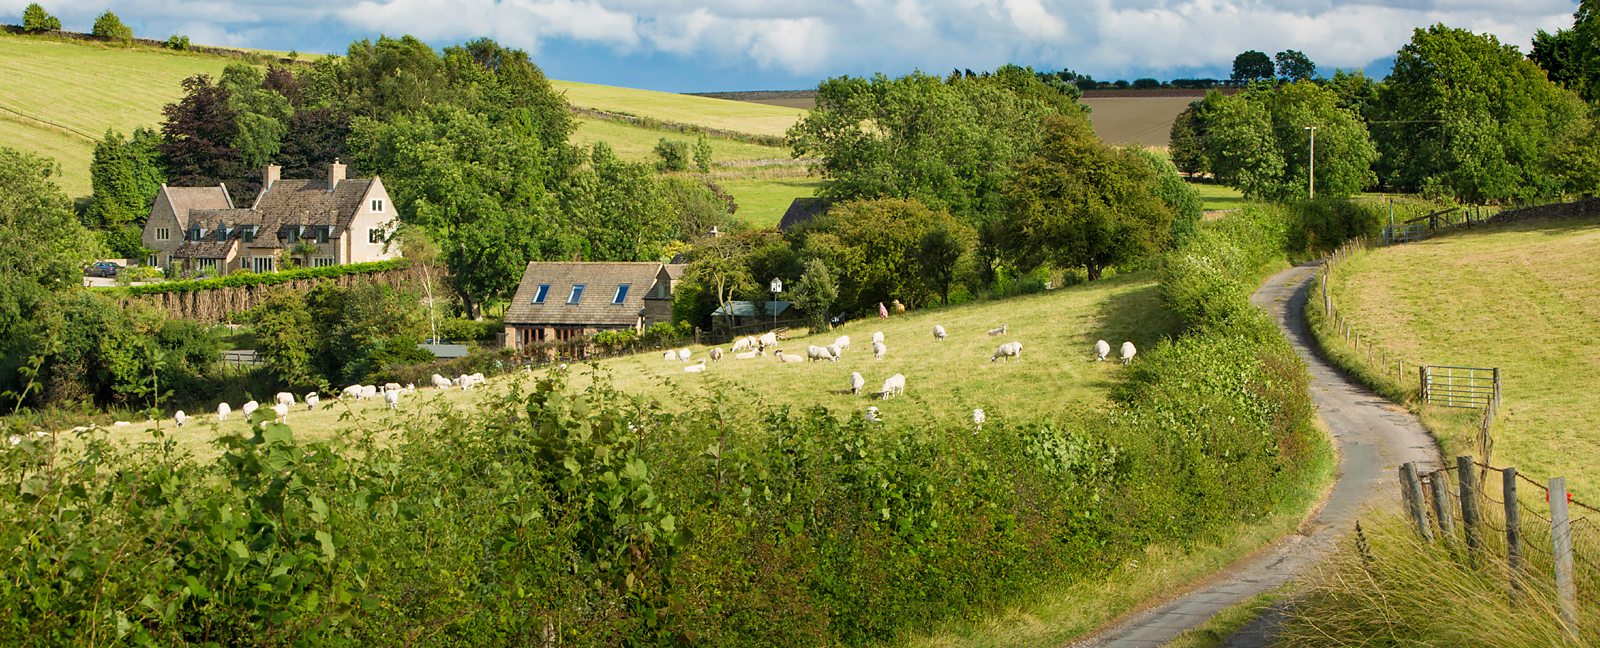 Living in the countryside makes people happier, ONS suggests